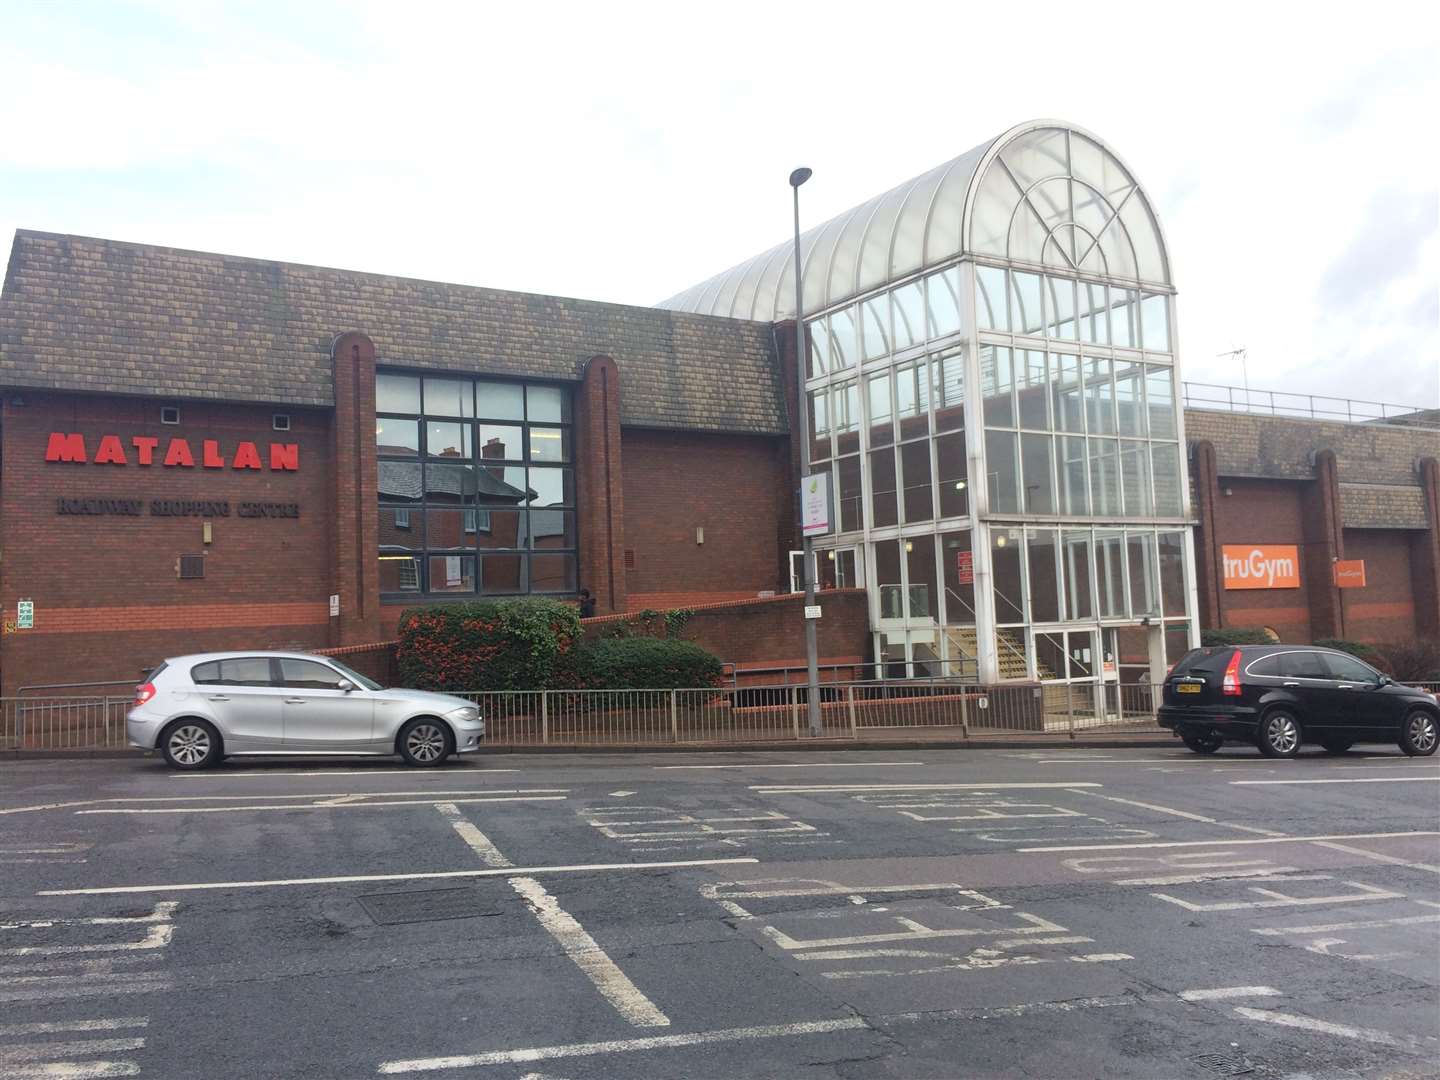 The plans will see the Broadway Shopping Centre demolished